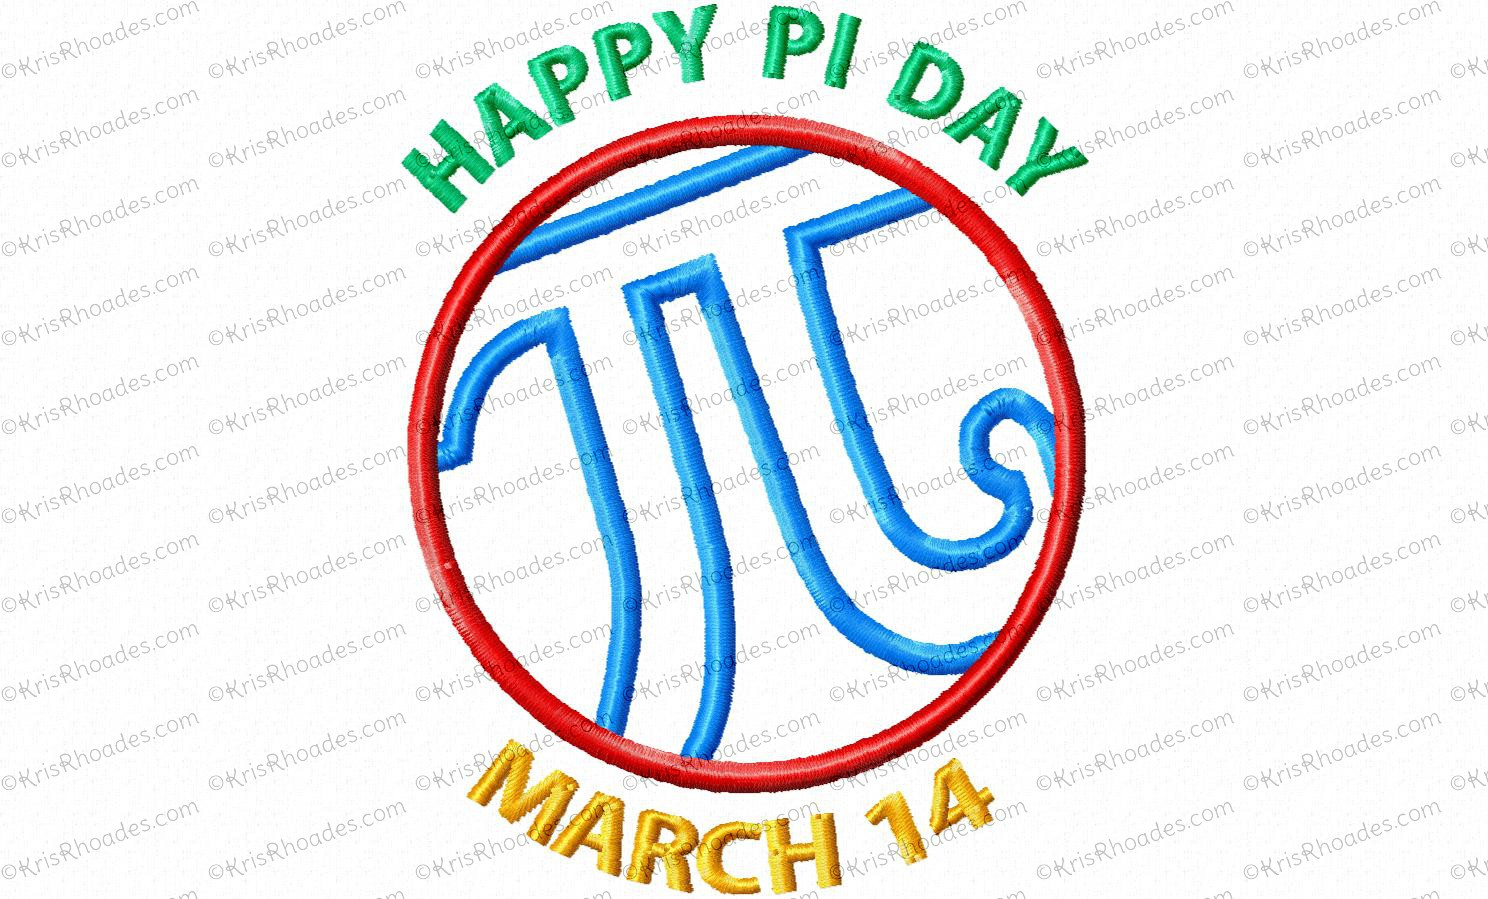 Happy Pi Day Gifts
 Happy Pi Day Applique Embroidery Design Kris Rhoades